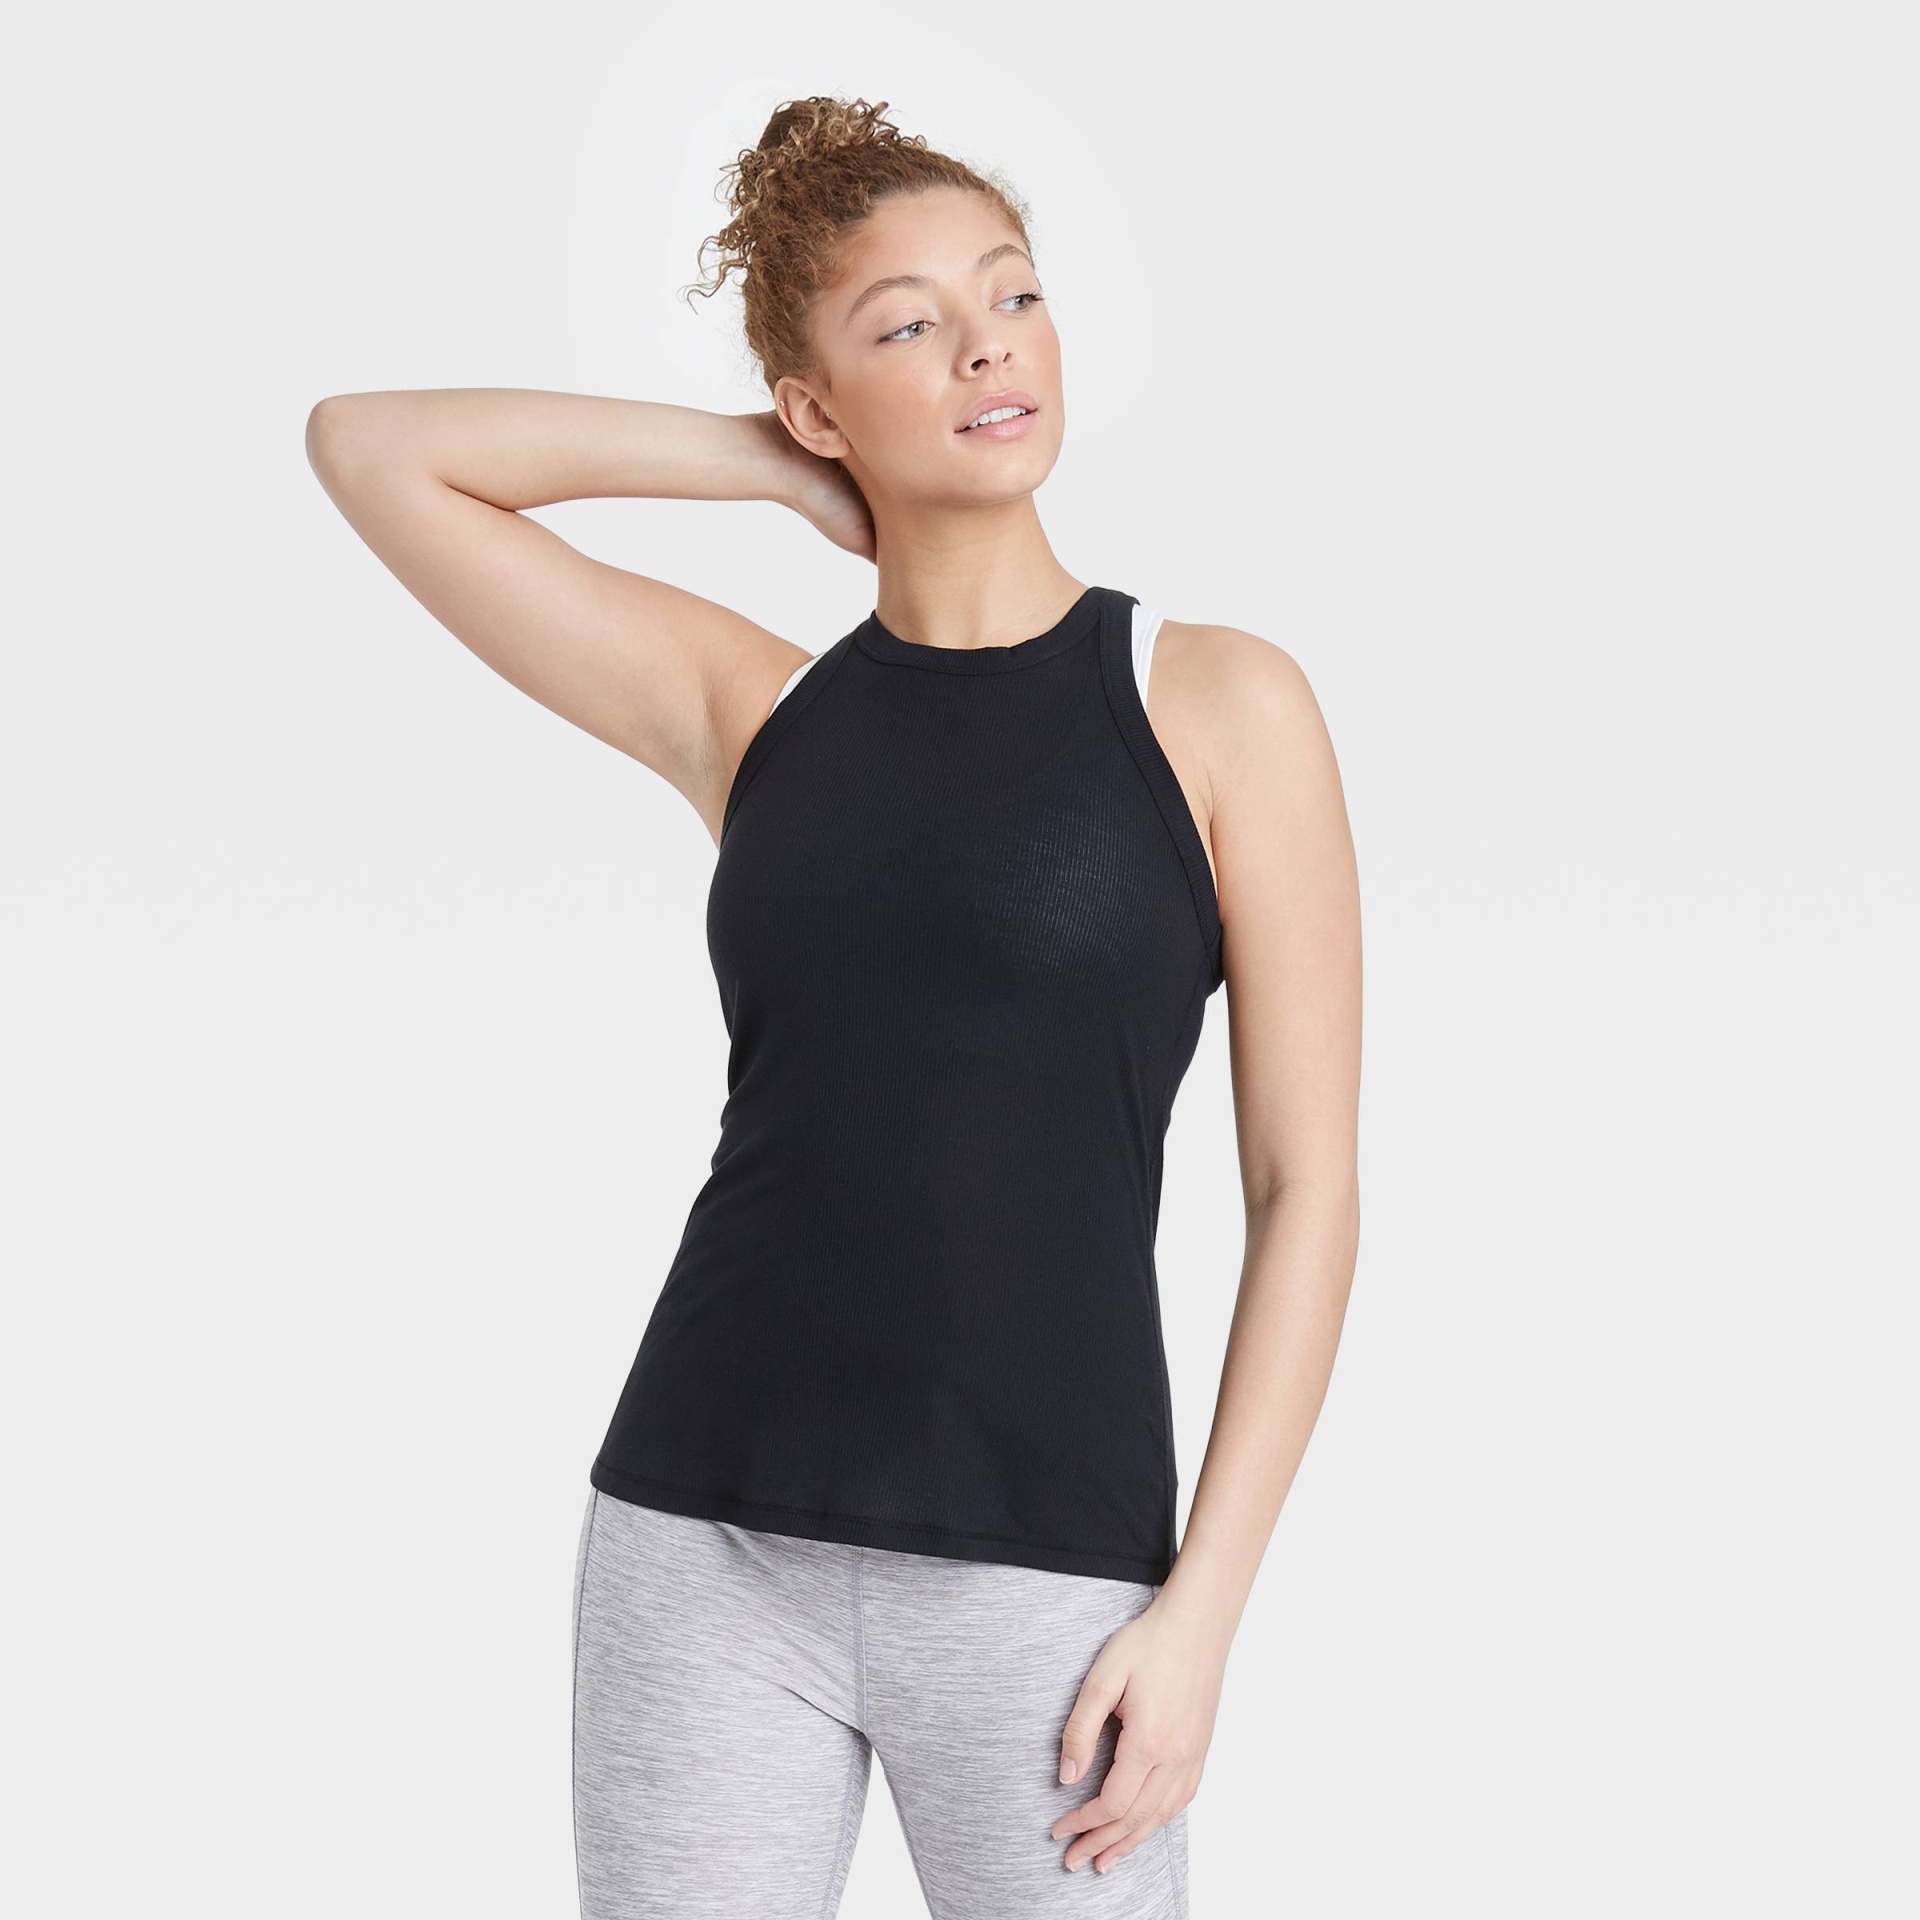 Women's Active Ribbed Tank Top - All in Motion Black XL 1 ct